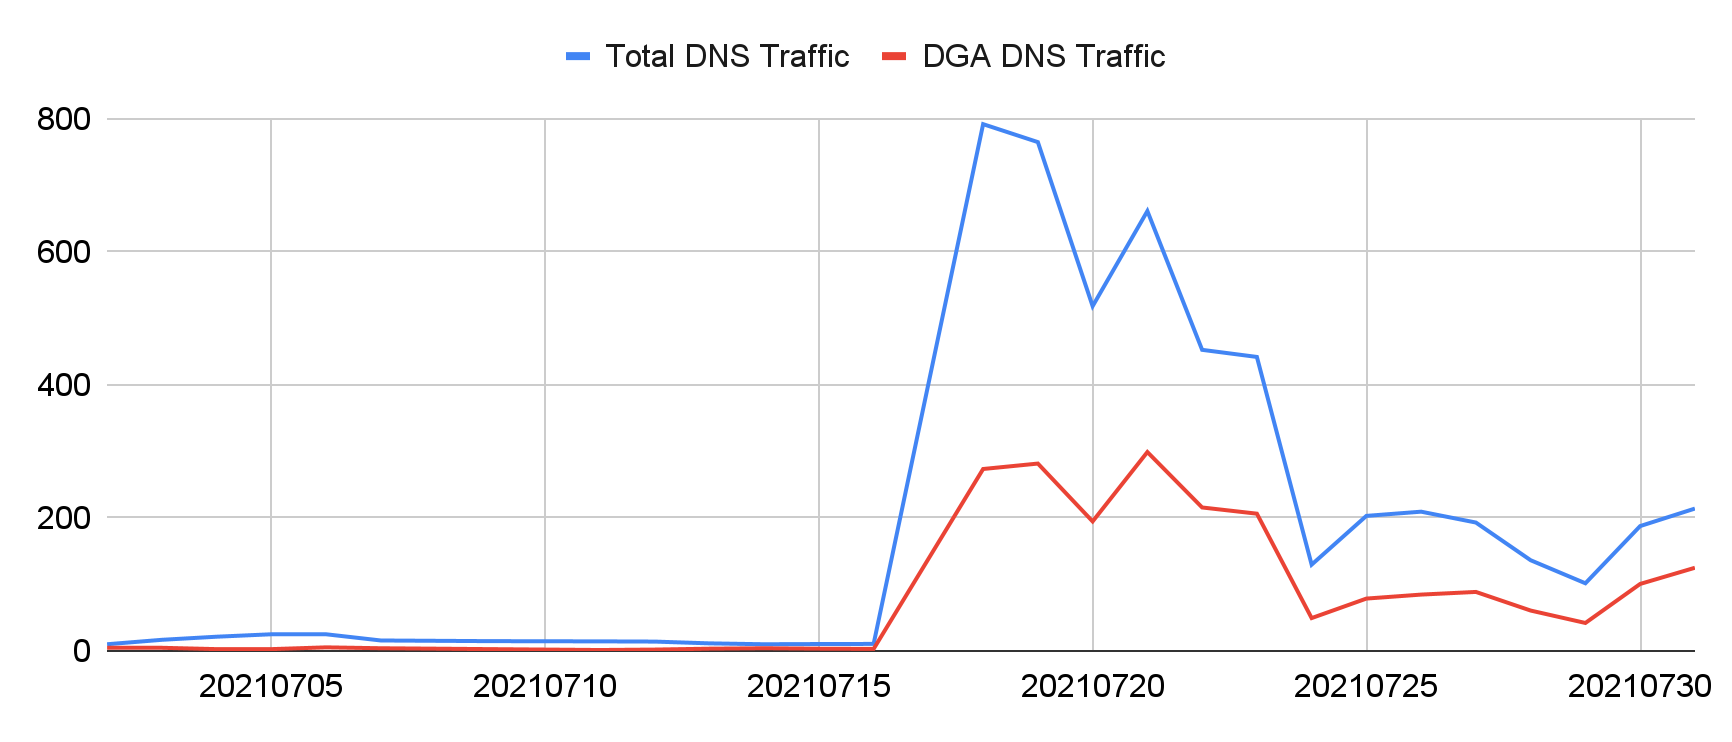 The two detected Pegasus spyward C2 domains, permalinking[.]com and opposedarrangement[.]net, were registered in 2019 and awoke in July 2021 with a high percentage of DGA traffic. The blue line represents total DNS traffic and the red line represents DGA DNS traffic. 